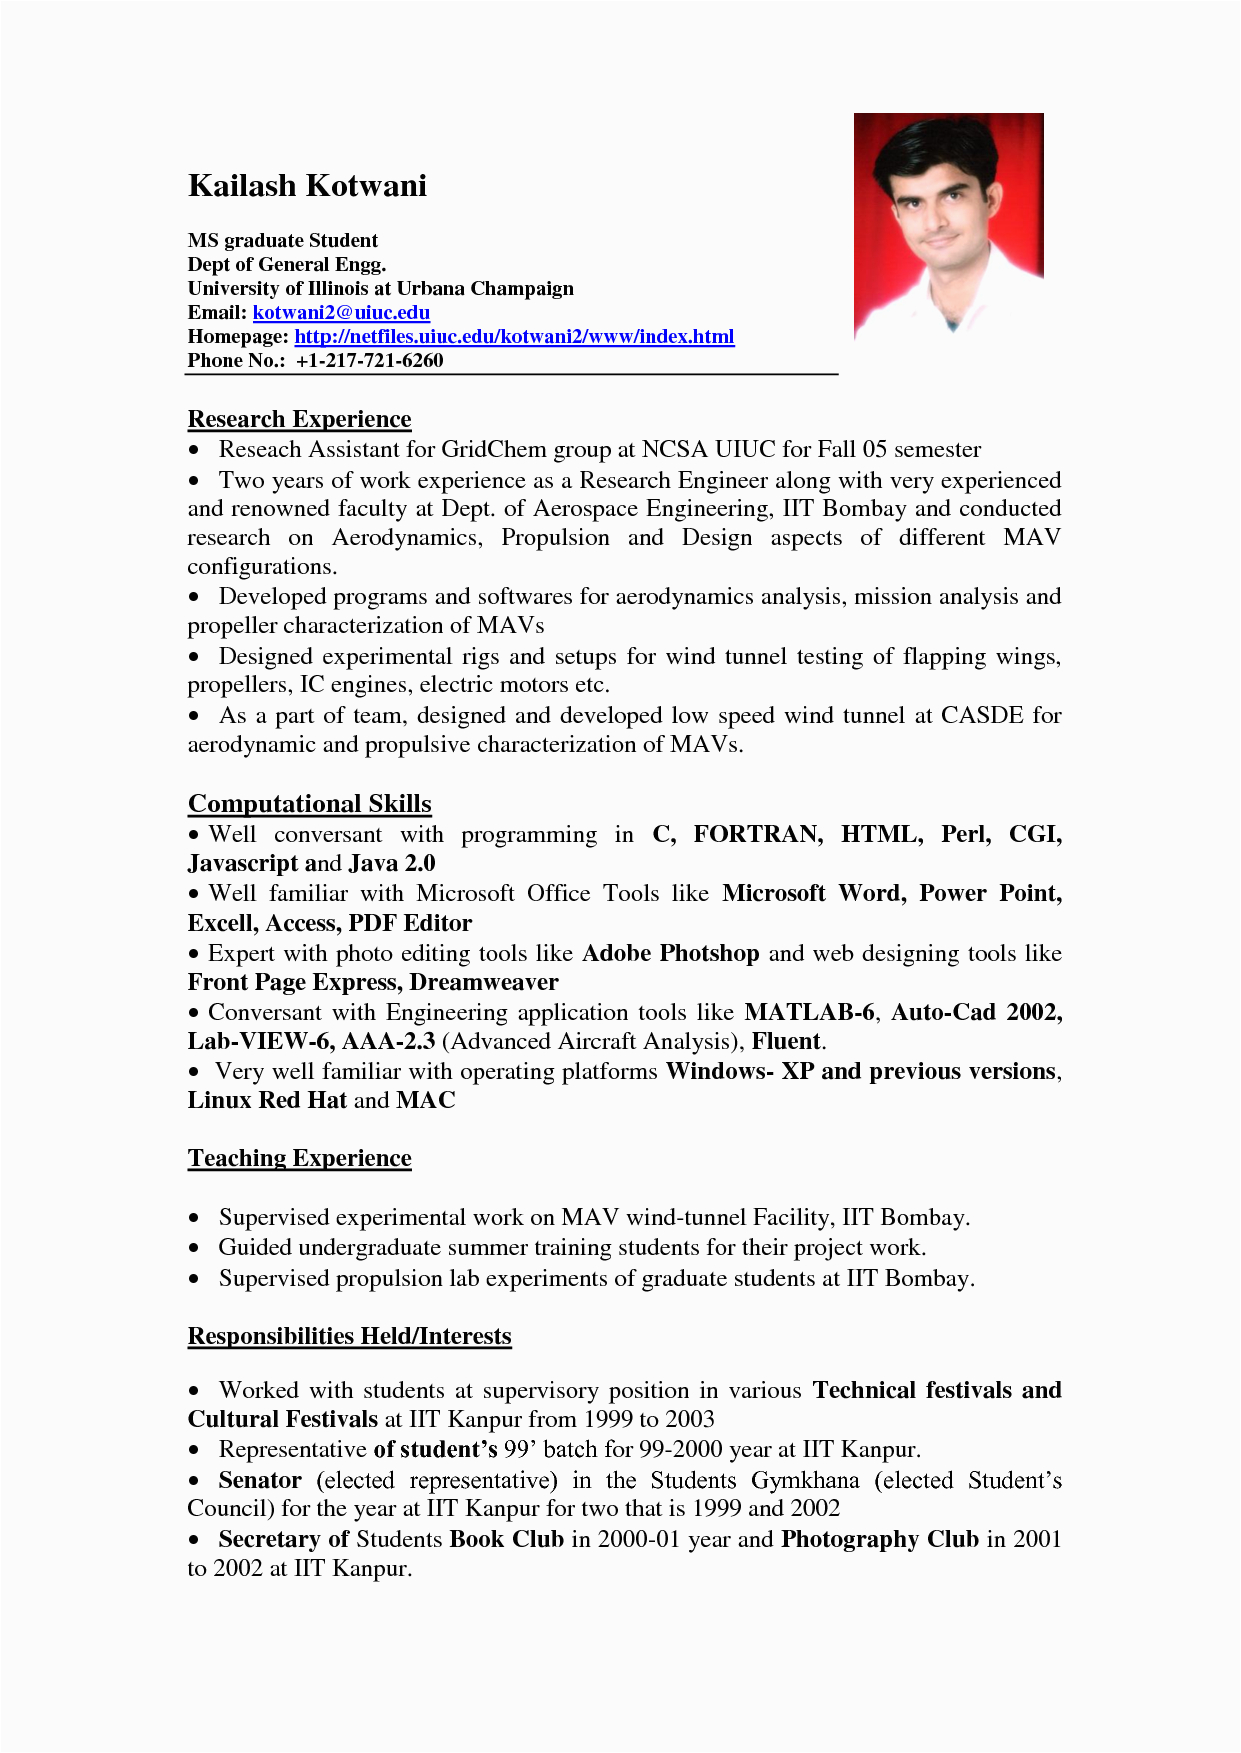 Resume Samples with Little Work Experience Resume with No Experience High School